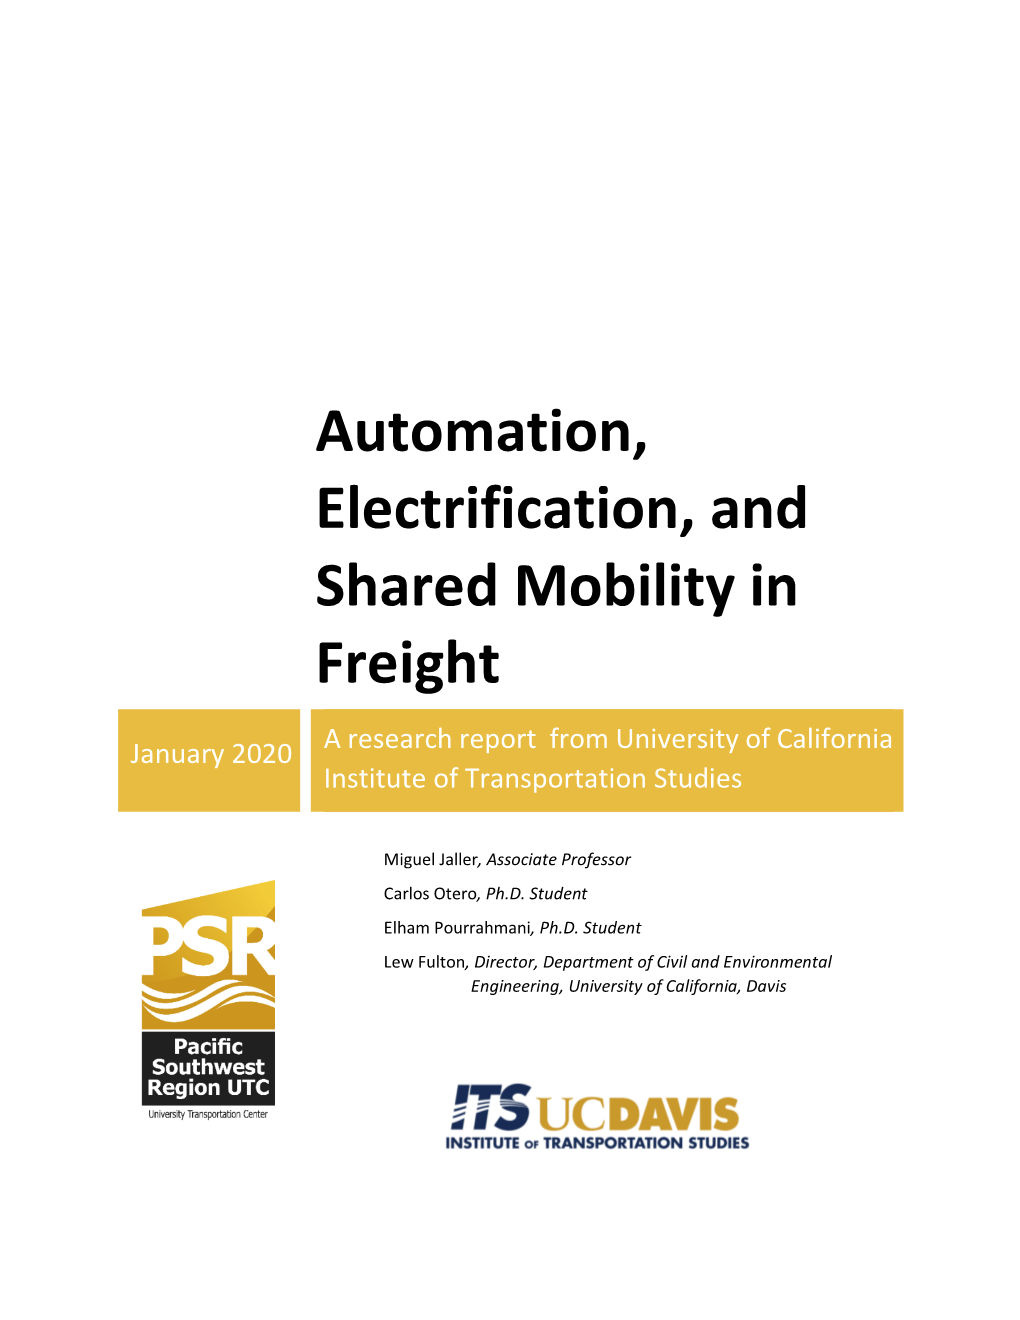 [Automation, Electrification, and Shared Mobility in Freight]